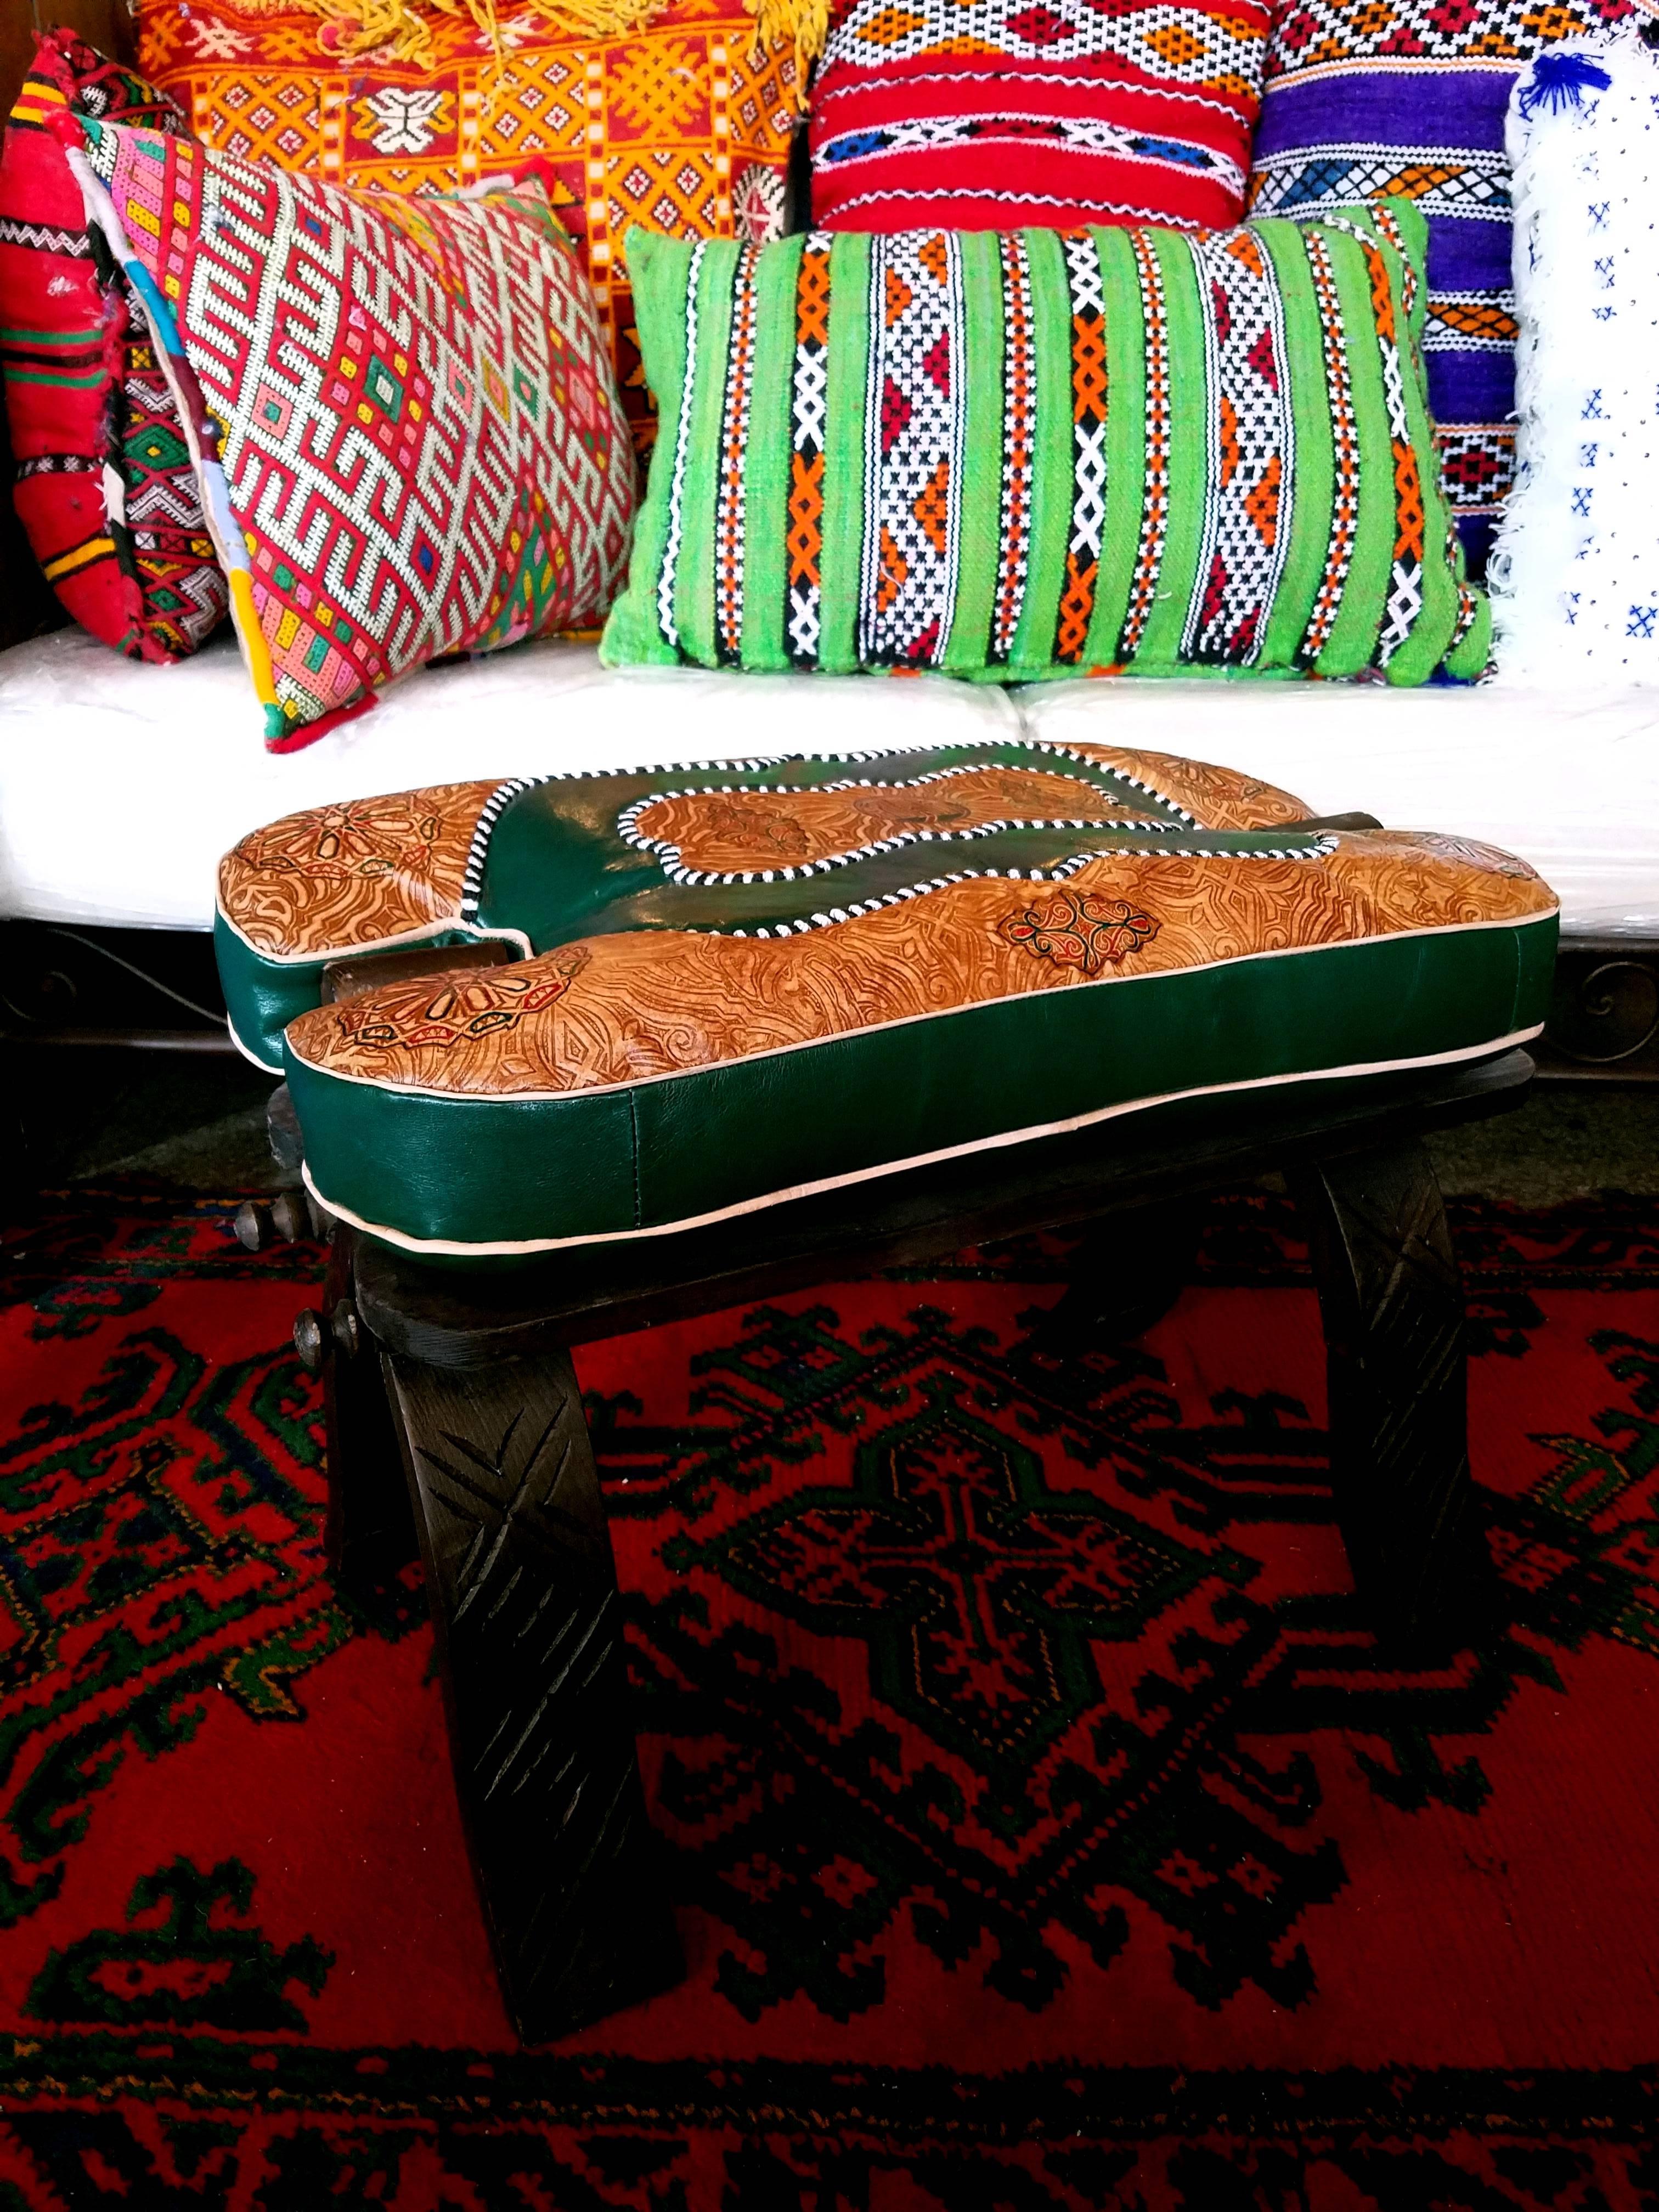 Contemporary Handmade Moroccan Camel Saddle, Tan / Green Leather Cushion For Sale